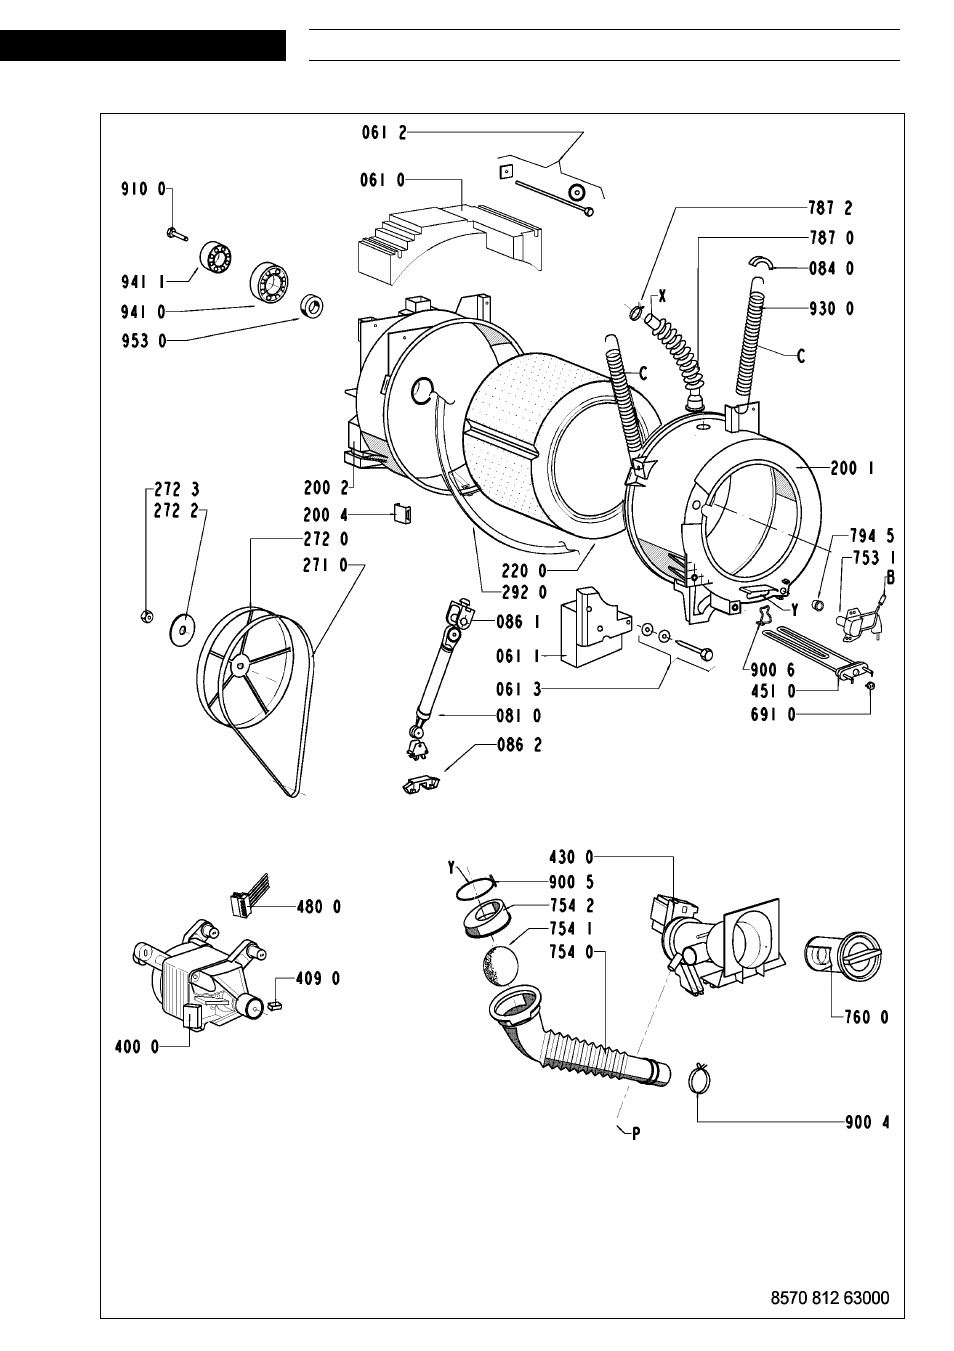 Exploded view | Whirlpool AWM8125 User Manual | Page 7 / 17